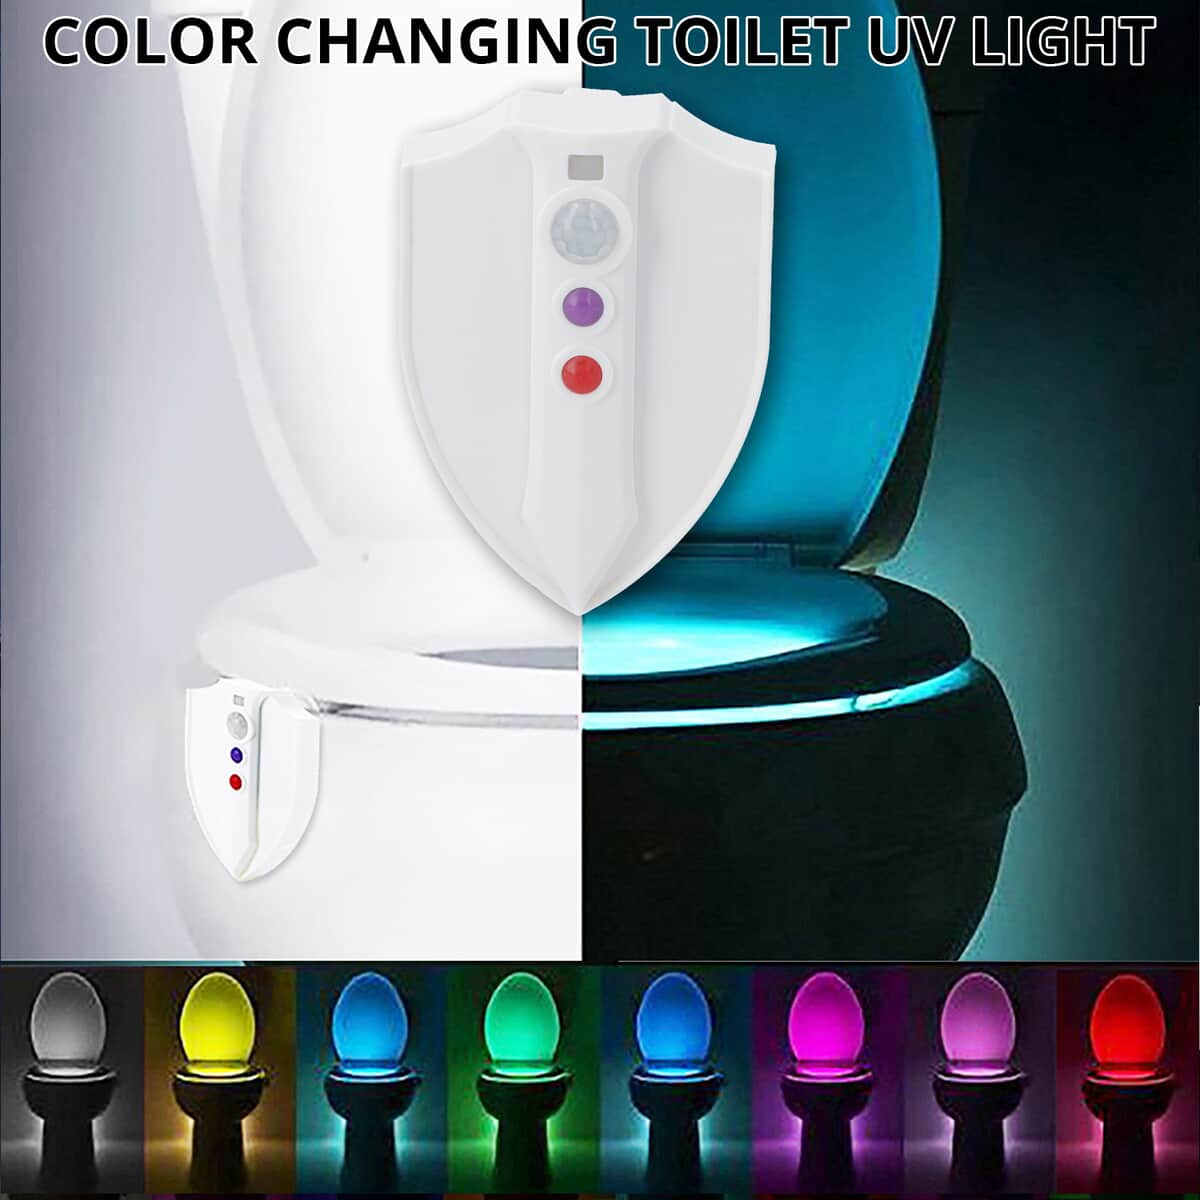 Lightning Bowl White Motion Activated Color Changing Toilet UV Light (3xAAA Battery Not Included) image number 1